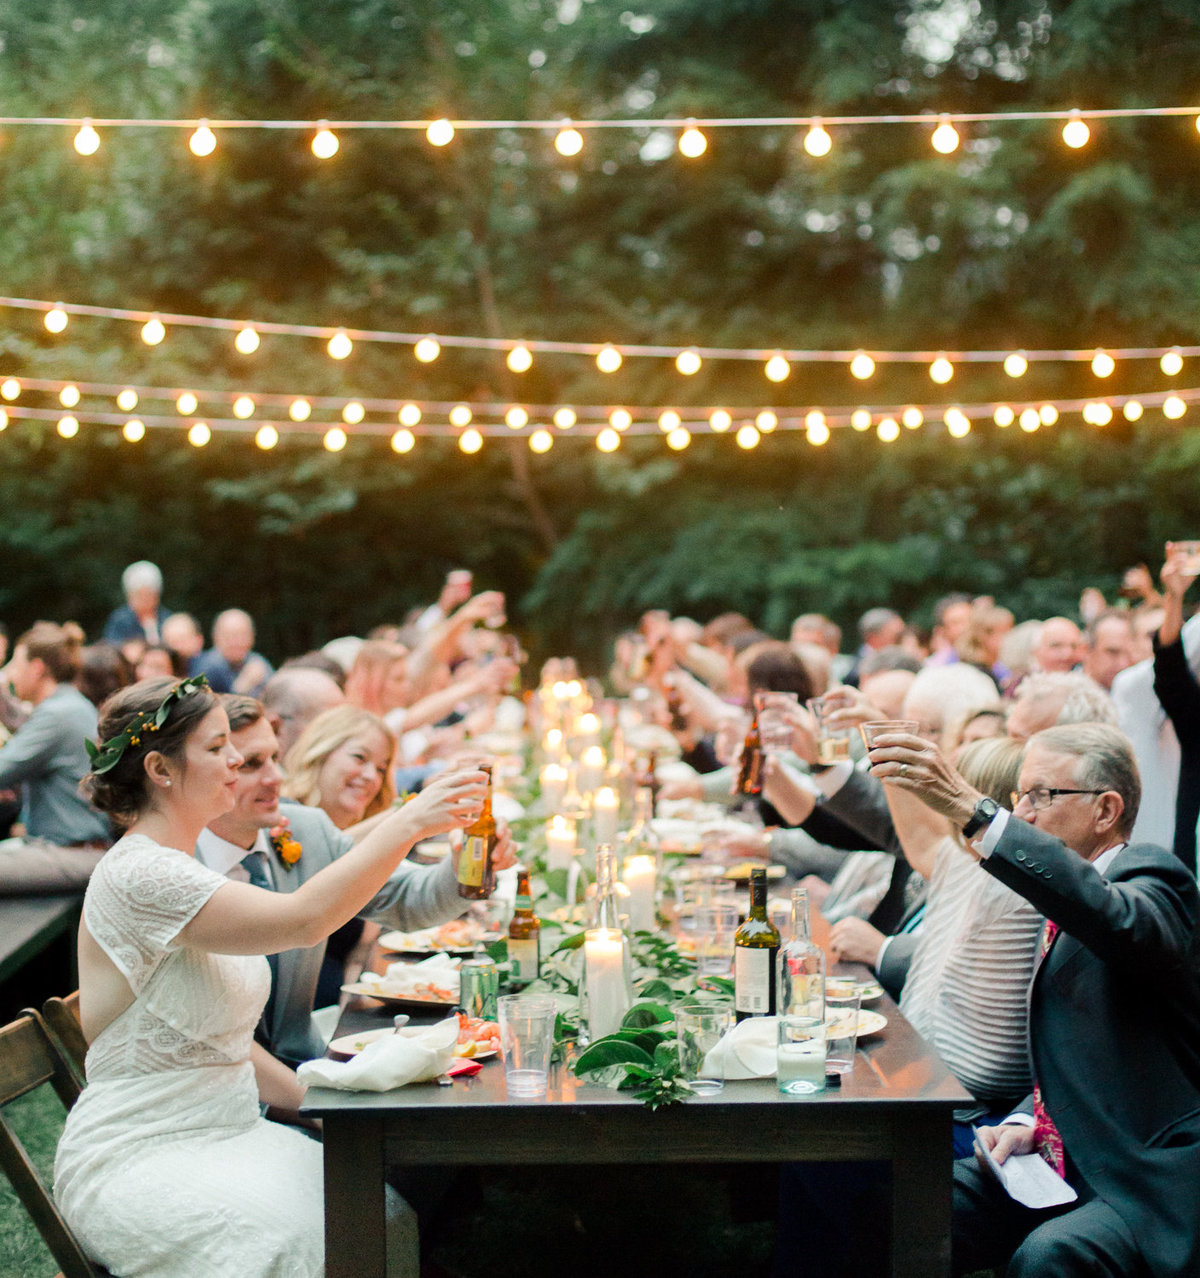 cheers of wedding reception table after speeches outdoor wedding under cafe lights wellspring spa washington